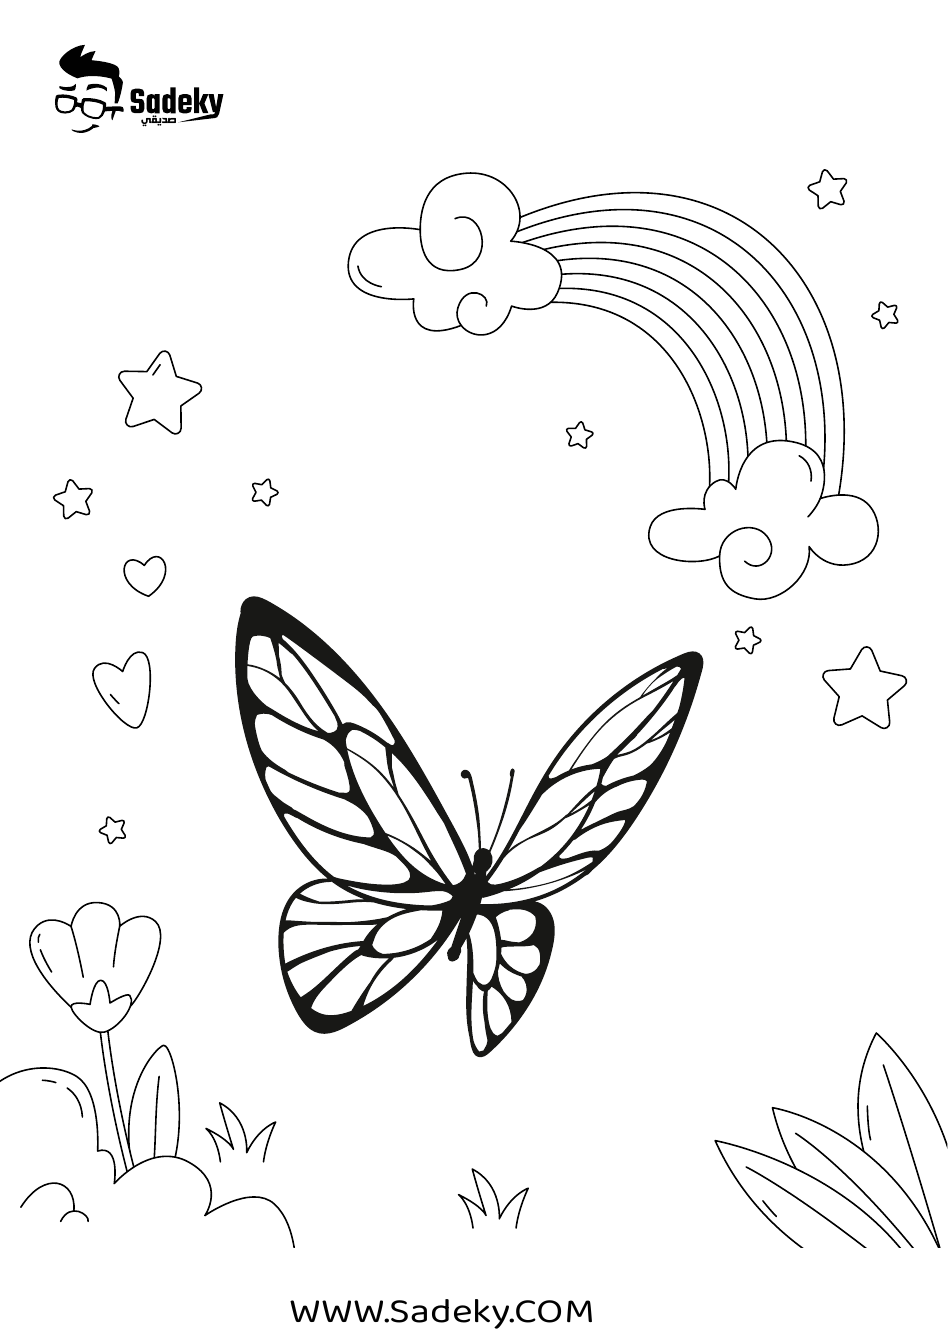 Butterfly Rainbow Coloring Page - Sadeky, Page 1